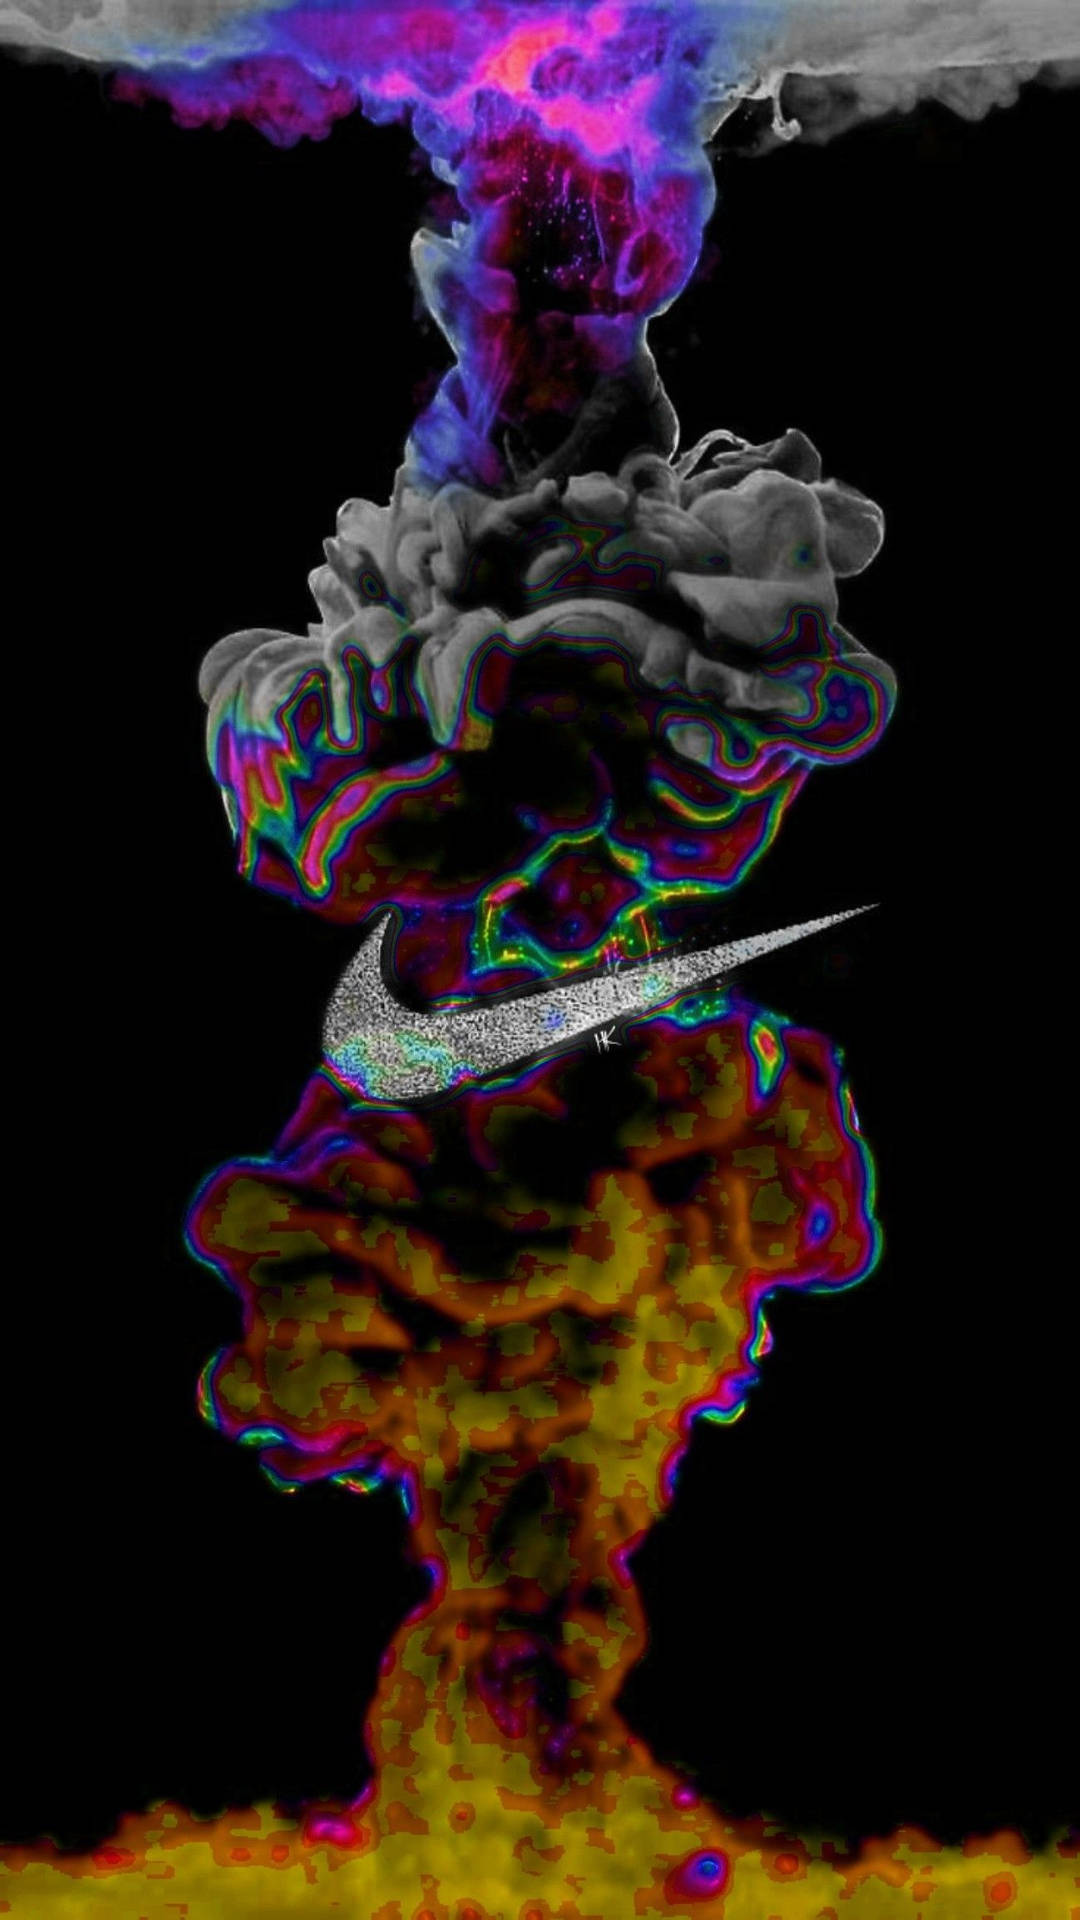 Get Your Nike Swag On With This Unique Graffiti Artwork. Wallpaper